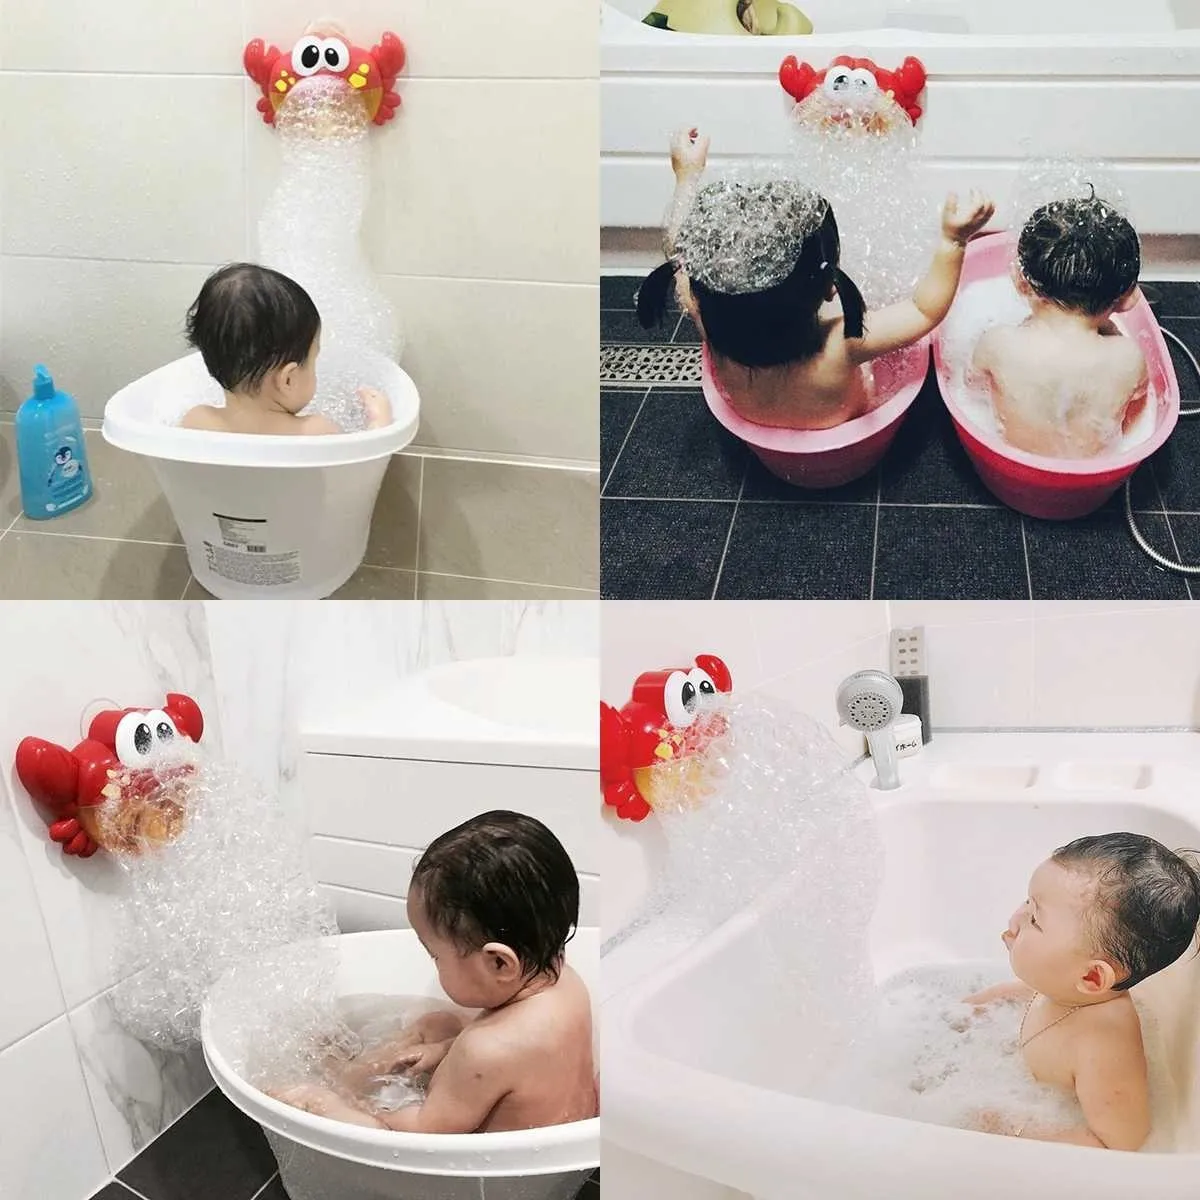 Cute Baby Bath Bubble Crabs Crab Automatic Shower Machine Blower Maker Bath Music Toys Cartoon Educational Toy Gift for Kids LJ201019